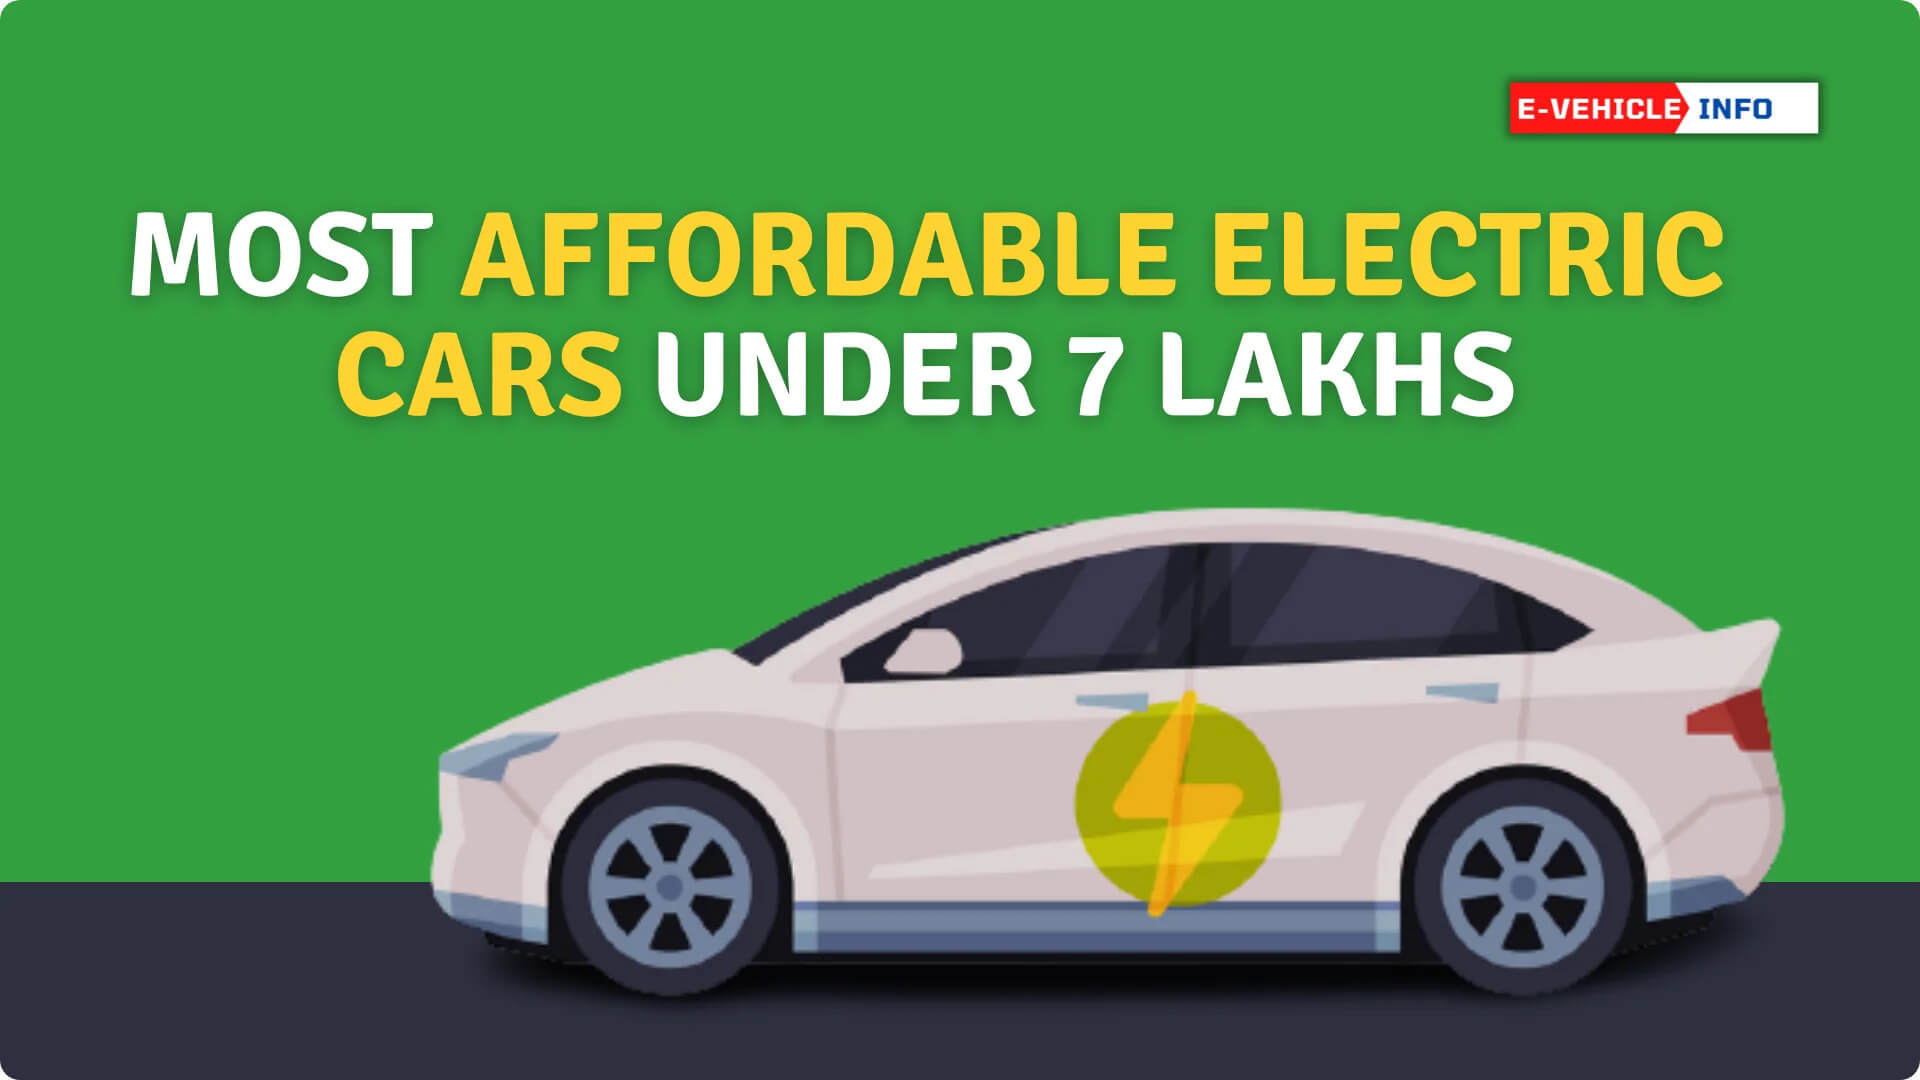 https://e-vehicleinfo.com/most-affordable-electric-cars-under-7-lakhs/